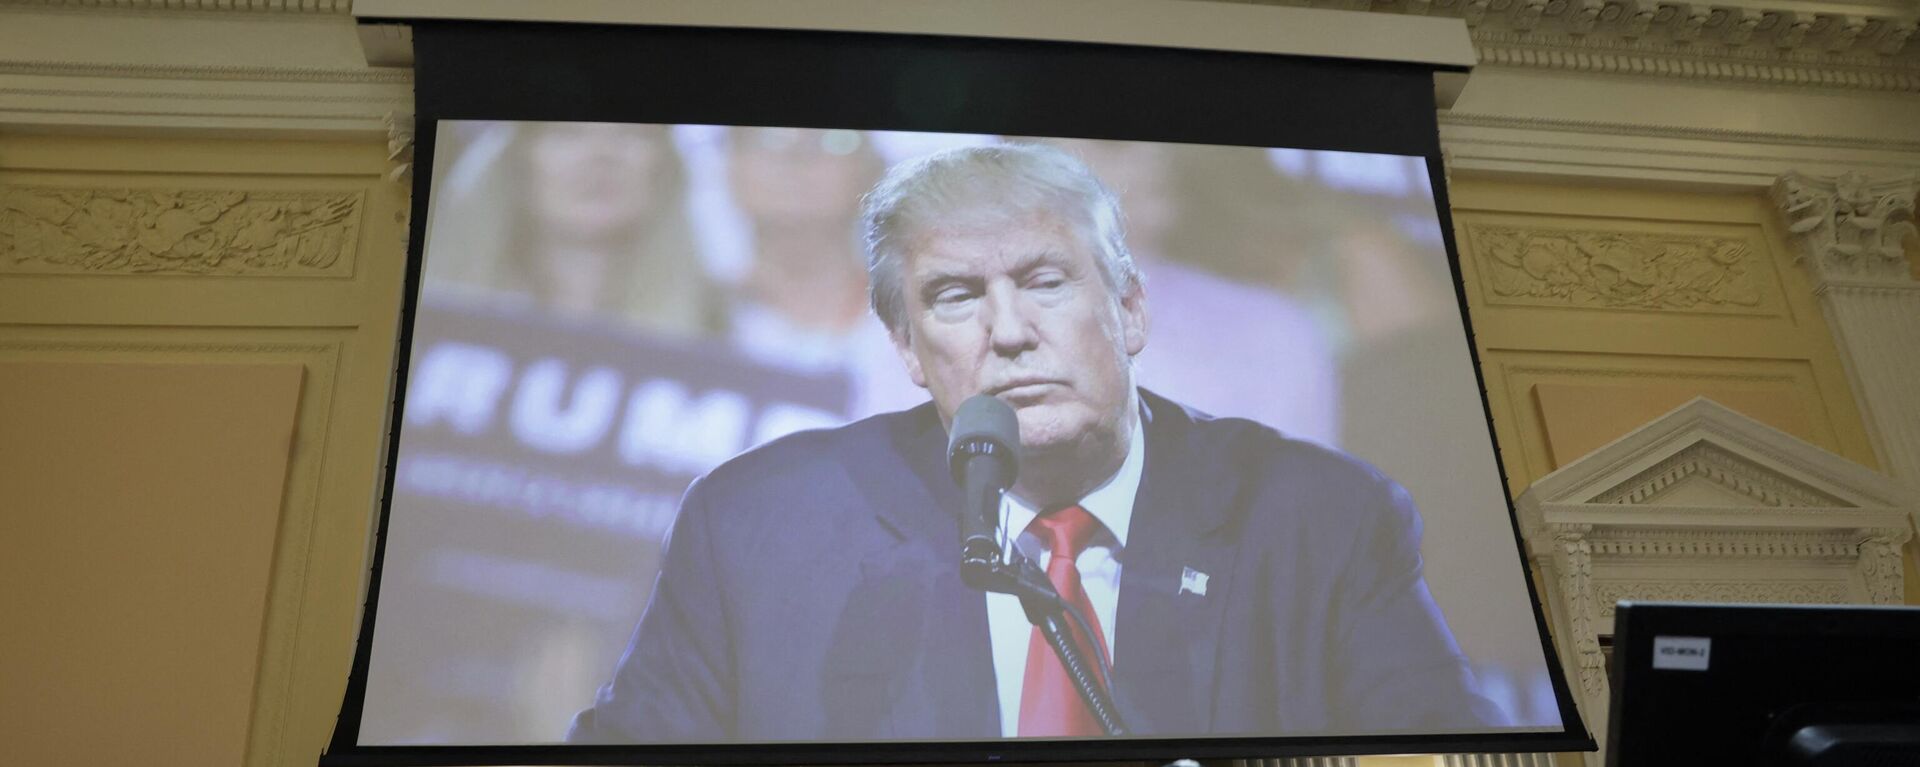 Former U.S. President Donald Trump appears on a video screen during the fourth hearing on the January 6th investigation in the Cannon House Office Building on June 21, 2022 in Washington, DC. - Sputnik International, 1920, 04.07.2022